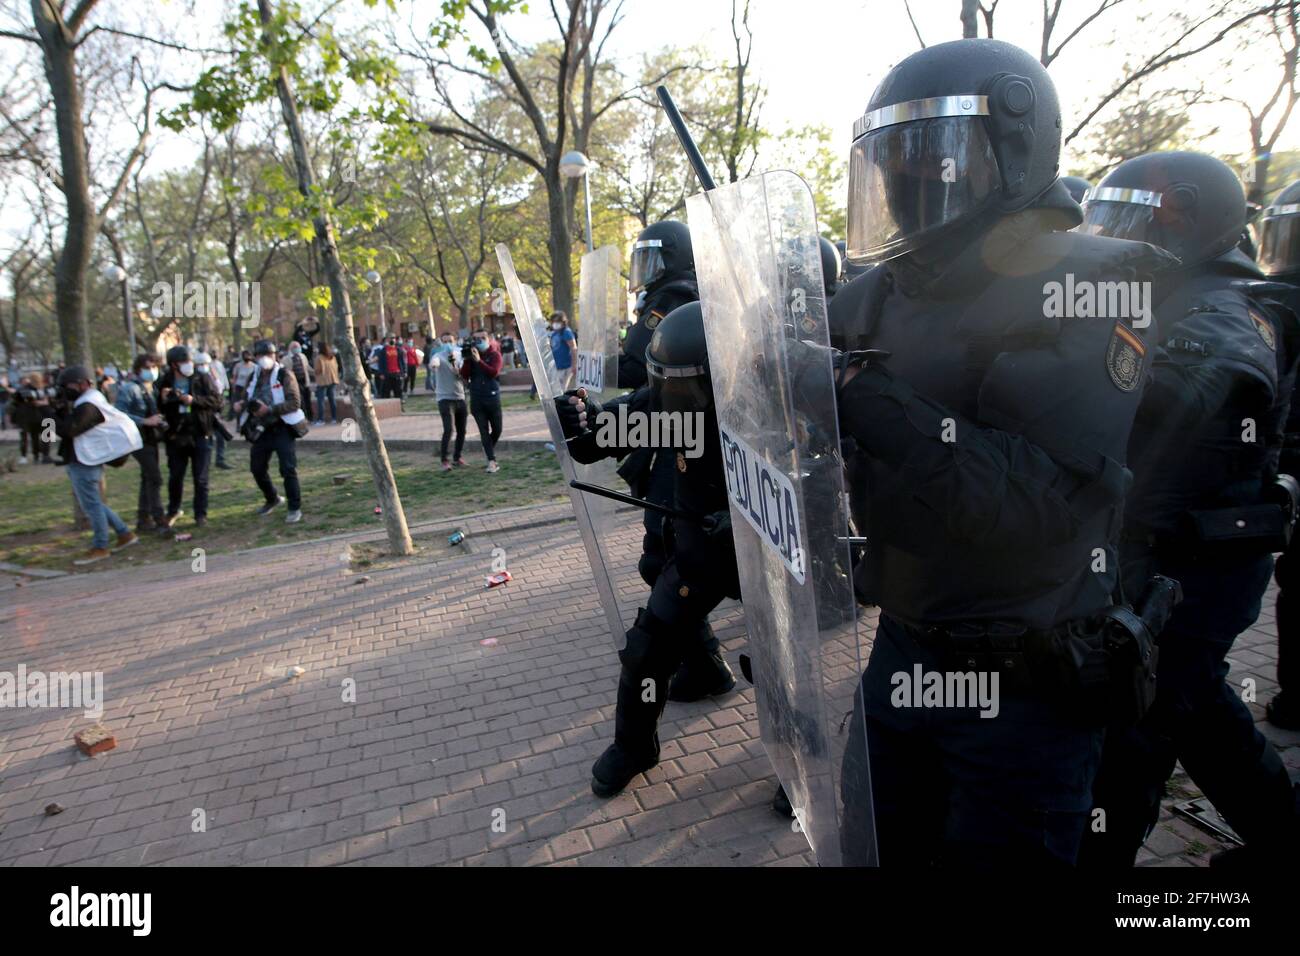 Madrid, Spain; 07.04.2021.- Police receive stones and other objects thrown by neighbors.Vox carries out its first act of electoral pre-campaign in Madrid in the working-class neighborhood of Vallecas. The National Police clash against residents of the Madrid neighborhood, who were protesting the pre-campaign act of the far-right party. The party's leader, Santiago Abascal, interrupted his rally and confronts several participants in the protests. Vox had gathered three hundred attendees in the popularly called 'Red Square' of Vallecas, separated by a narrow police cordon, the residents of the n Stock Photo